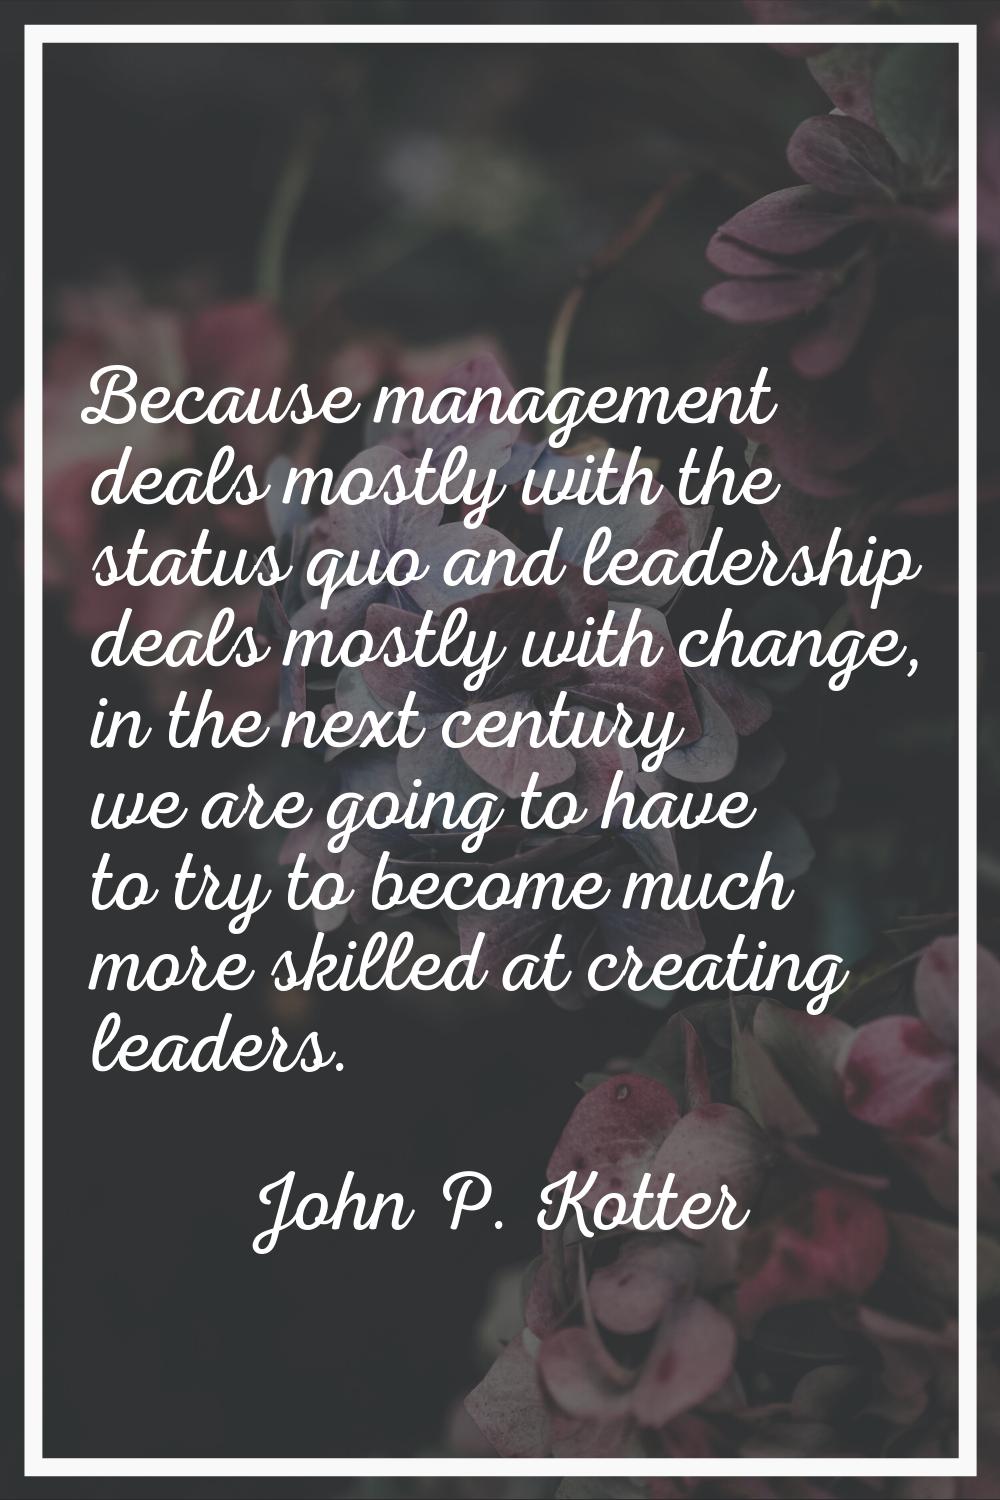 Because management deals mostly with the status quo and leadership deals mostly with change, in the